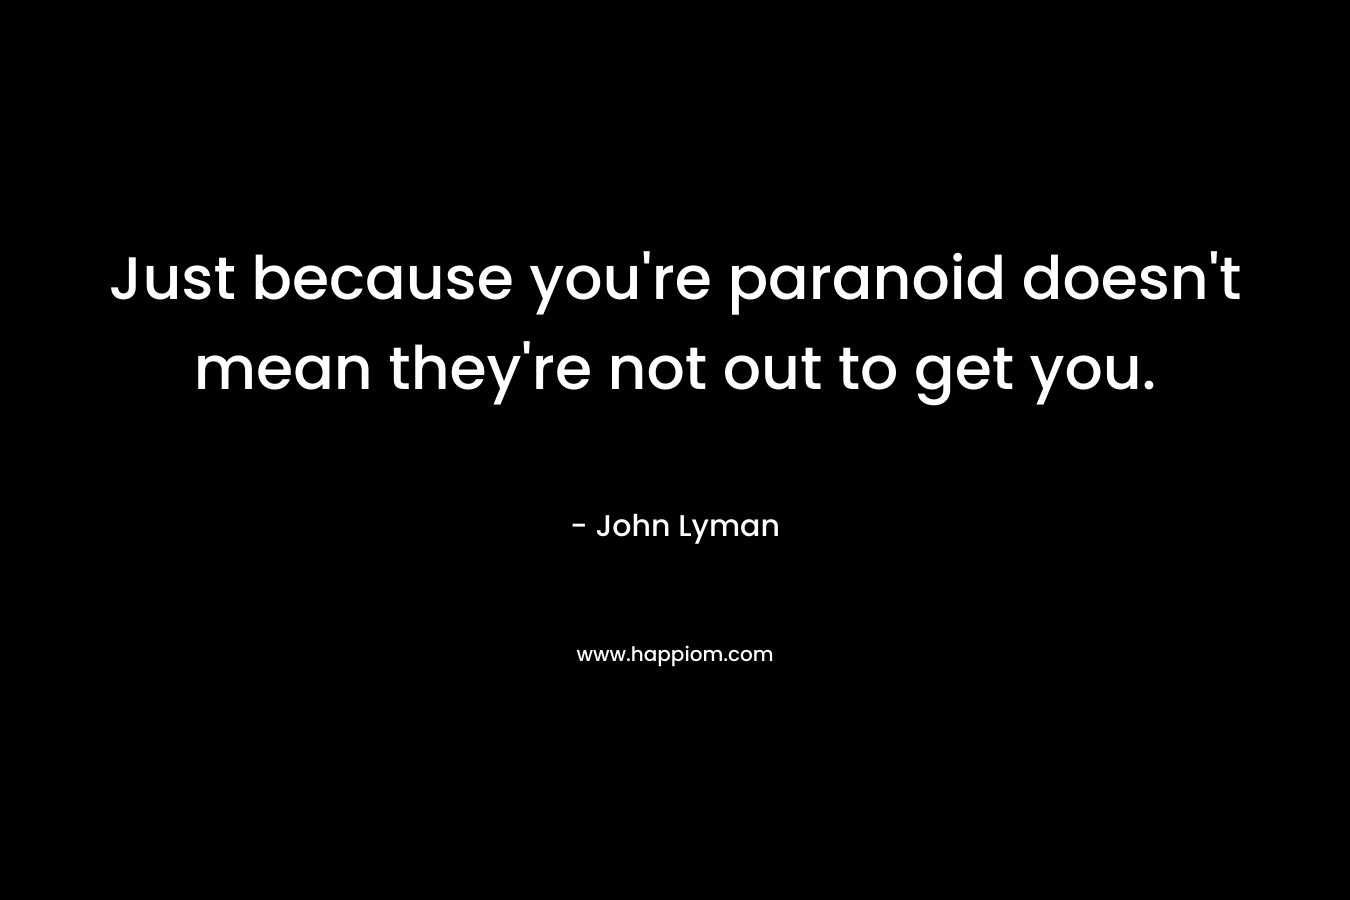 Just because you're paranoid doesn't mean they're not out to get you.